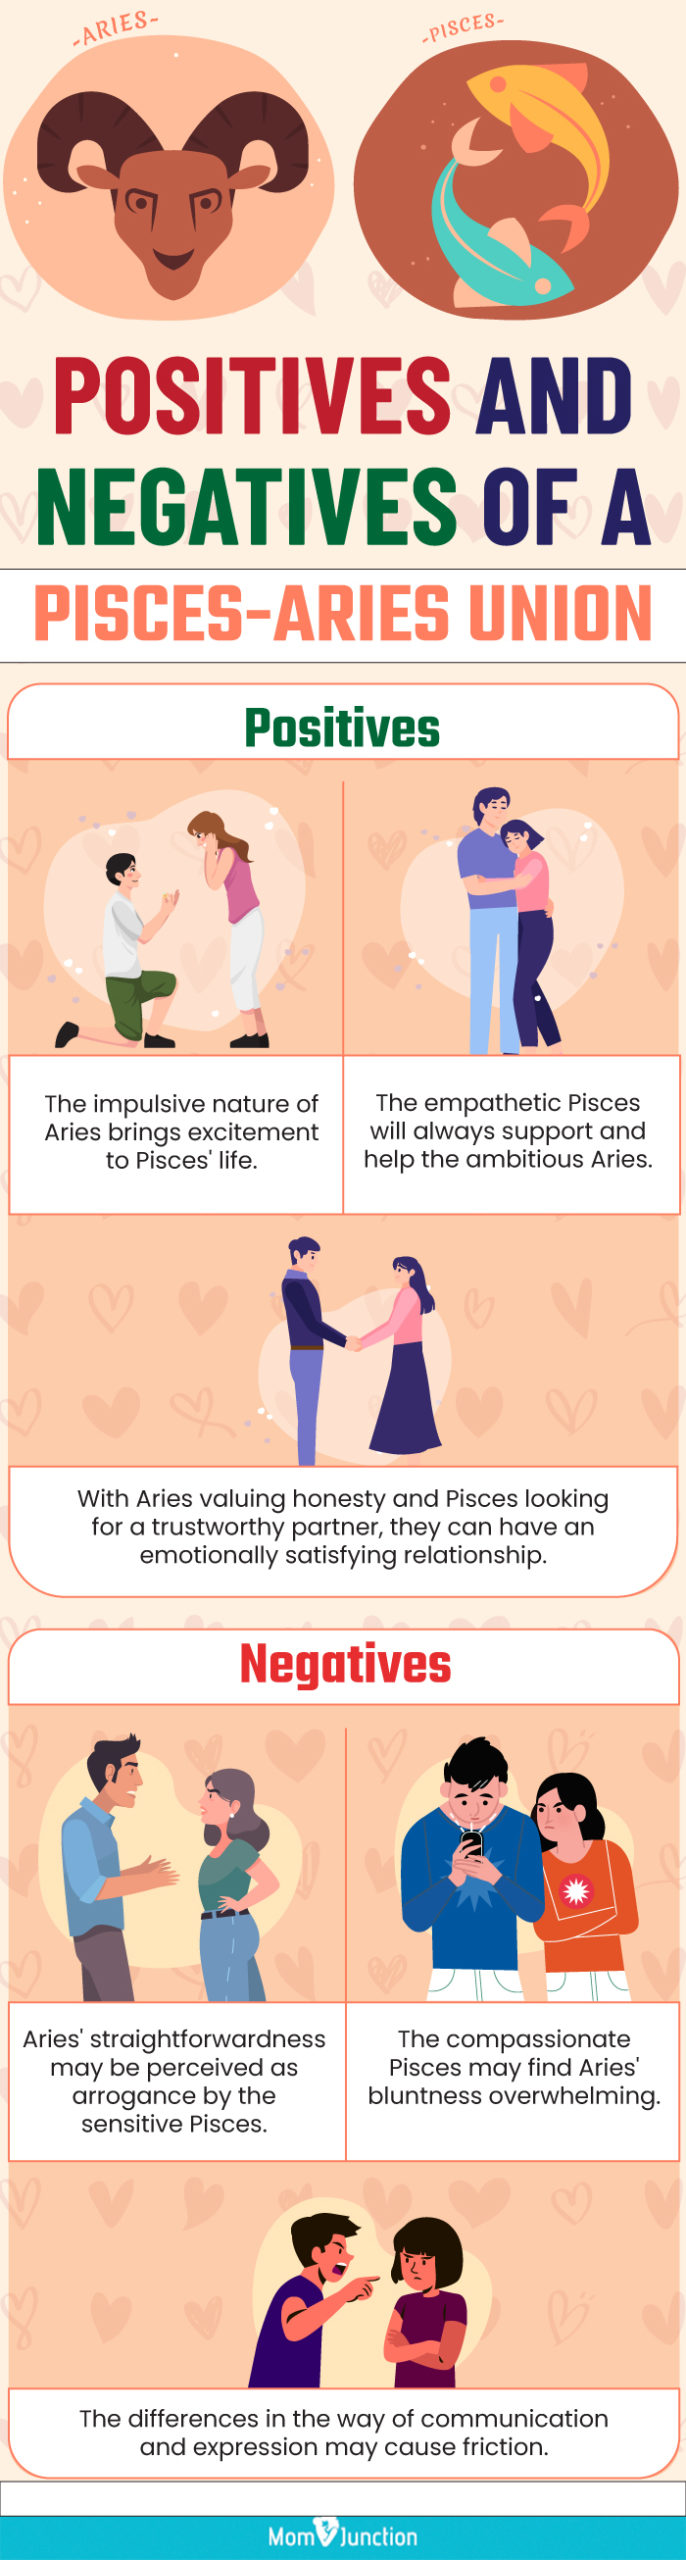 positives and negatives of a pisces aries union (infographic)